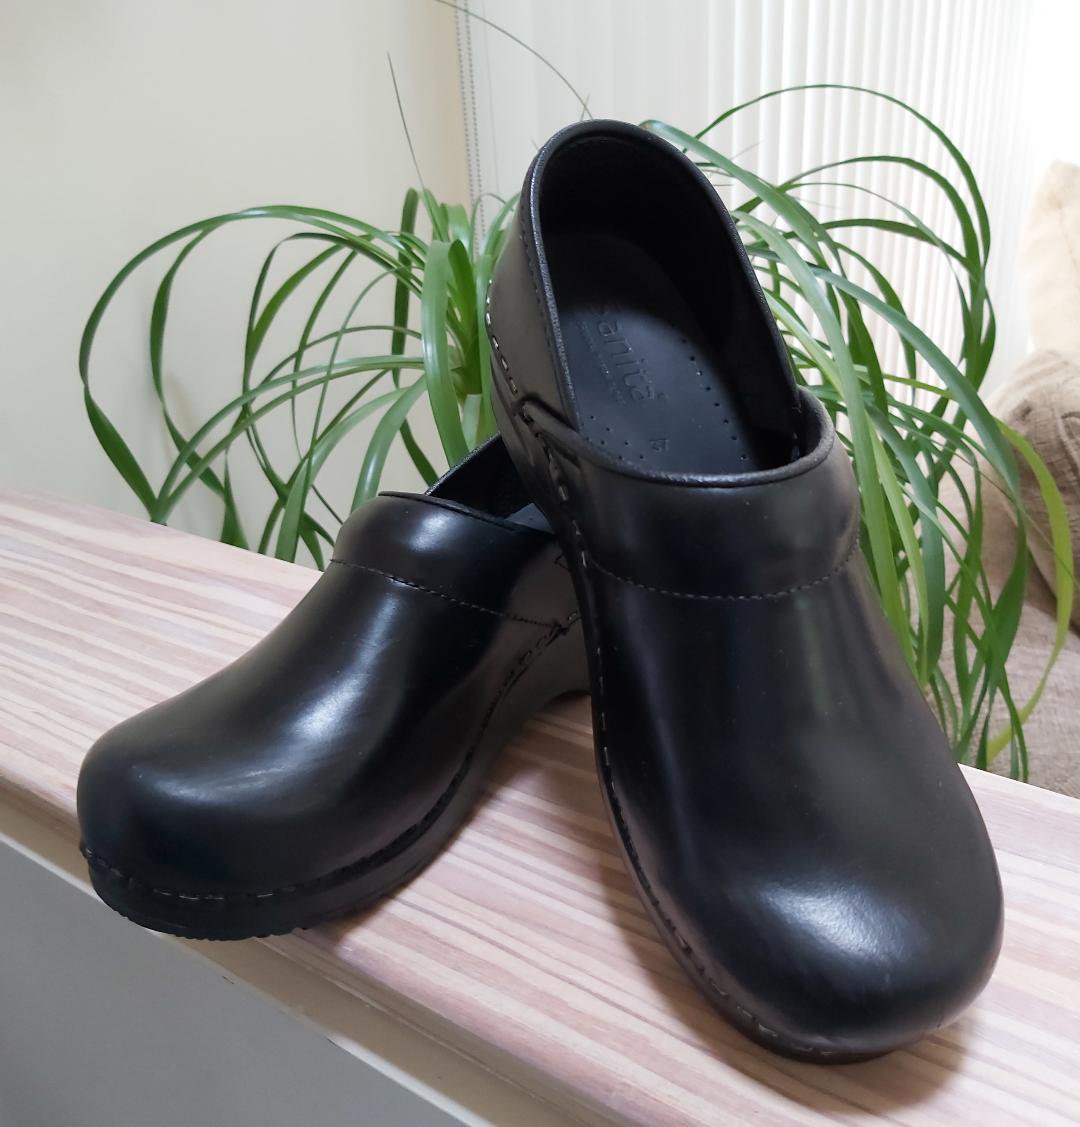 Sanita 'Professional Smooth' Closed Clogs in Black - Size 37 - 6.5!